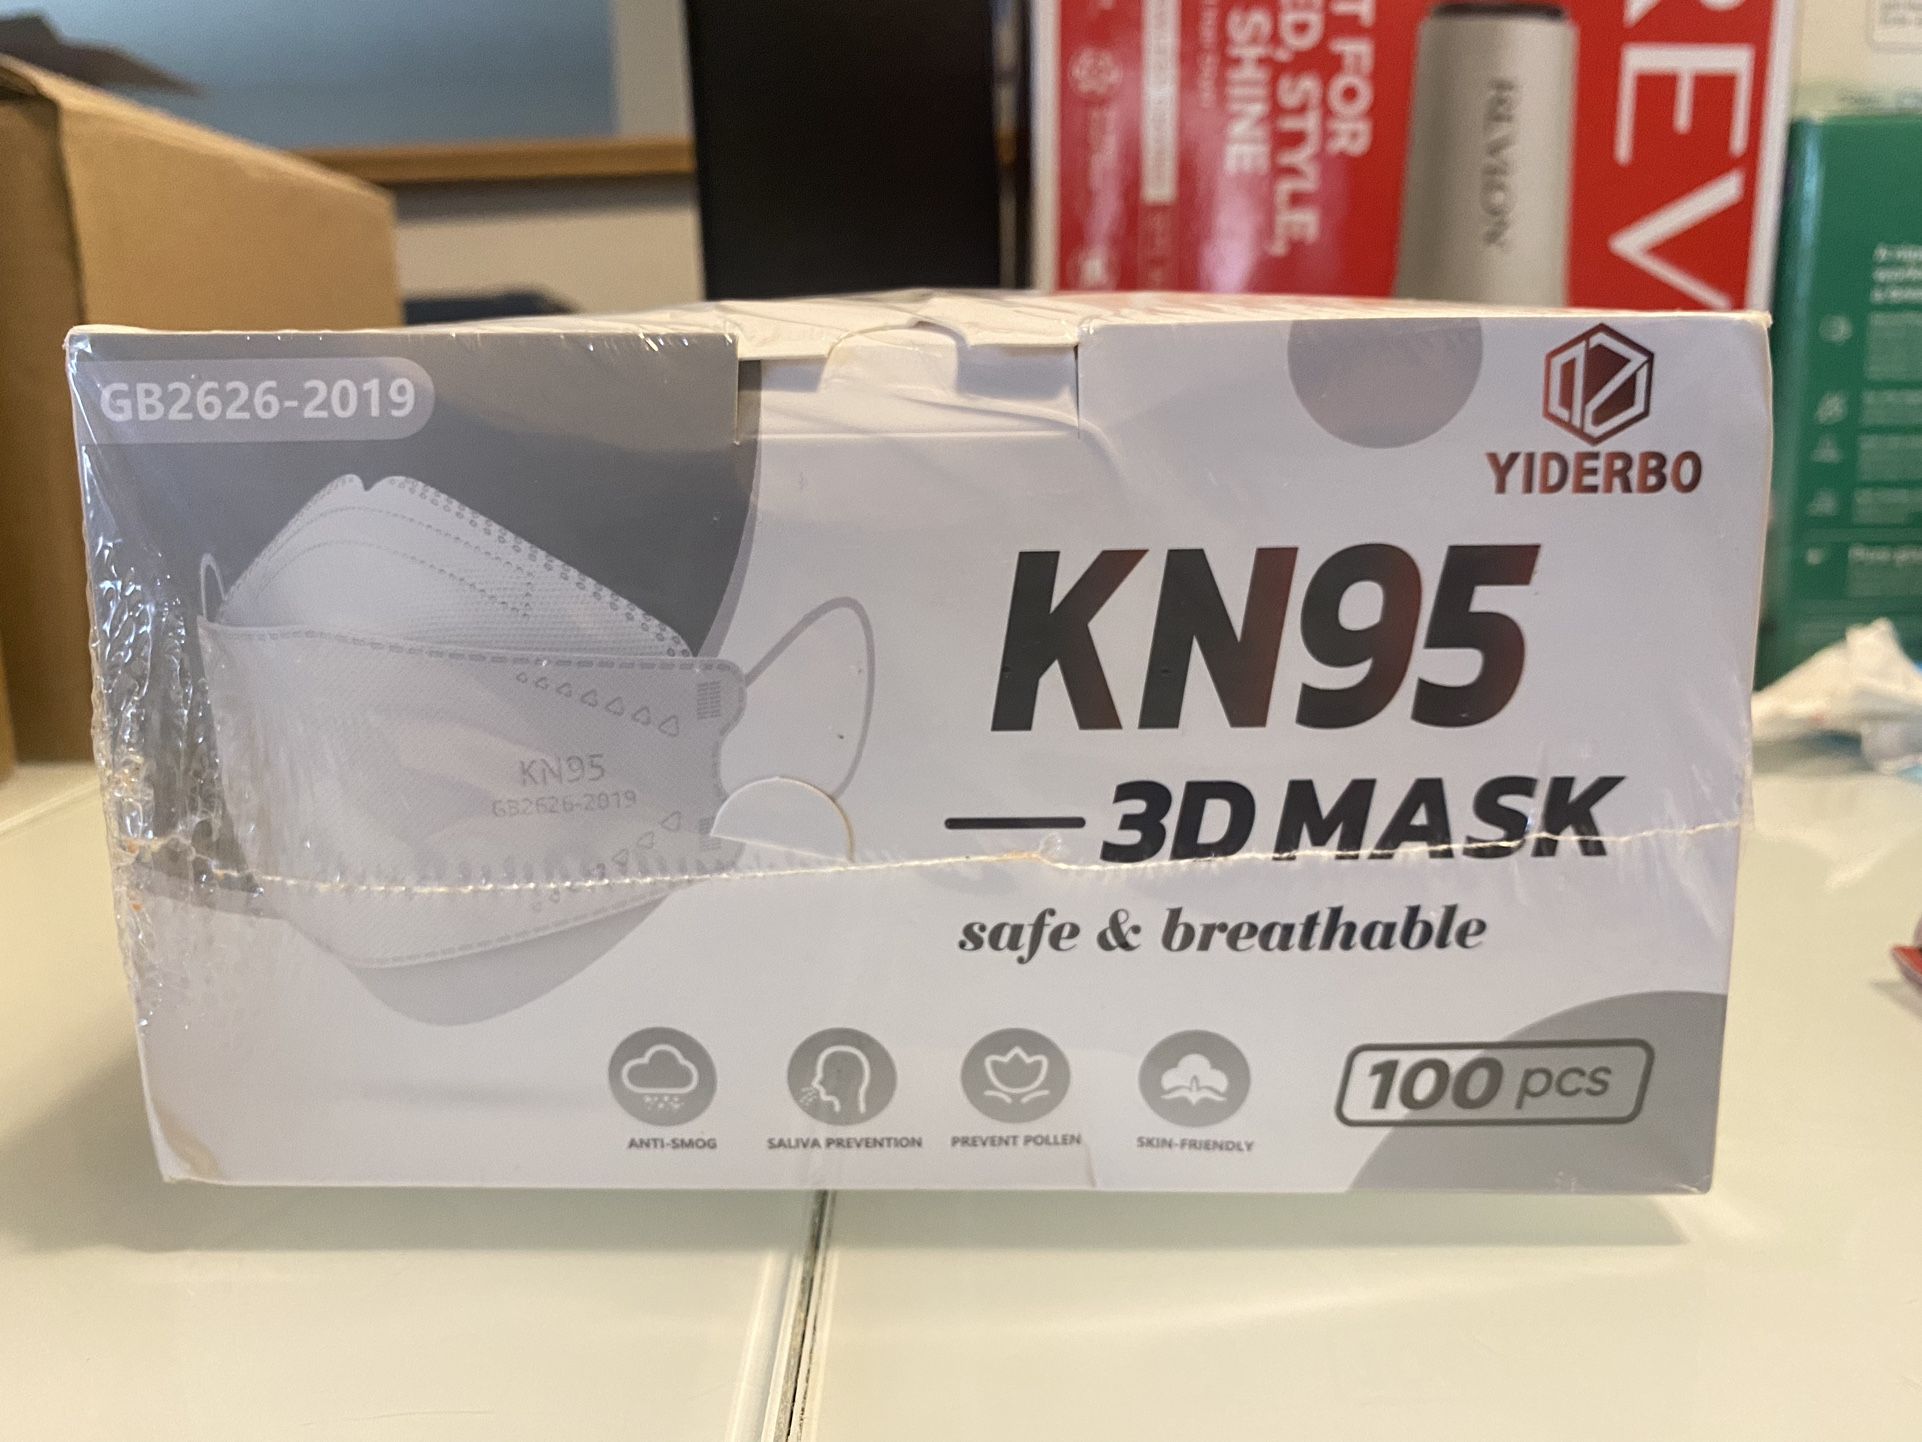 Face Mask ‘kn95’